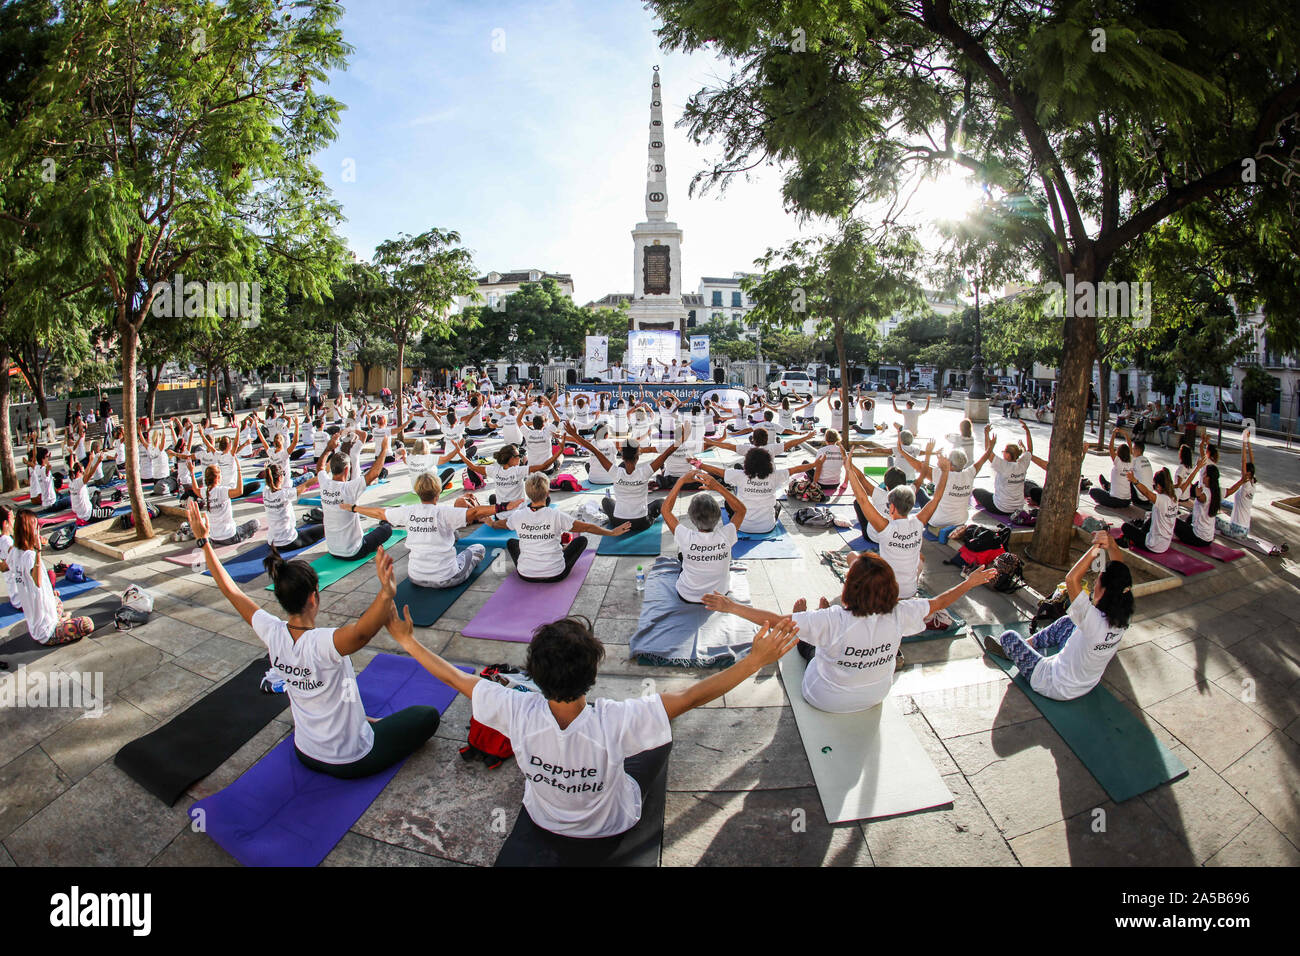 August 4, 2009: 19 october 2019 (Malaga) VI EDITION YOGA IN THE SQUARE. For a responsible use of the public spaces, Take care of your body, take care of your city. Plaza de la Merced hosts the sixth edition of 'Yoga en la Plaza' which, under the motto 'Take care of your body, take care of your city', advocates the responsible use of public spaces, respect for the common good and the practice of responsible and healthy habits, as well as spreading the culture of yoga. This activity, organized by the Malaga City Council through the awareness program 'MÃ¡laga CÃ³mo te Quiero!? ', with the support Stock Photo